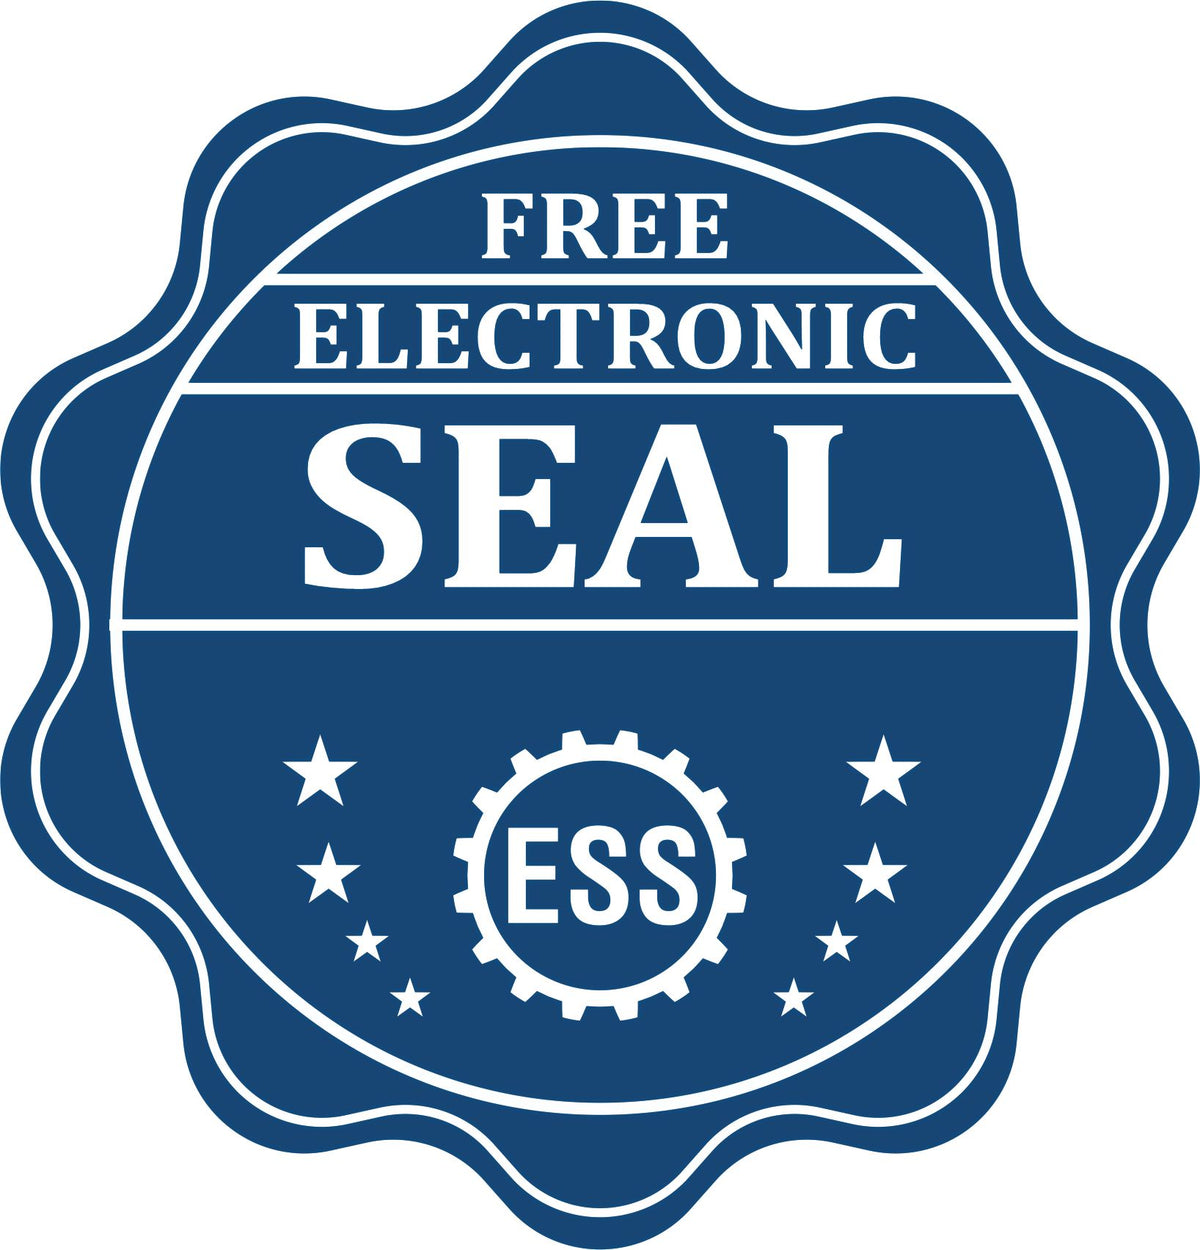 A badge showing a free electronic seal for the Hybrid Georgia Landscape Architect Seal with stars and the ESS gear on the emblem.